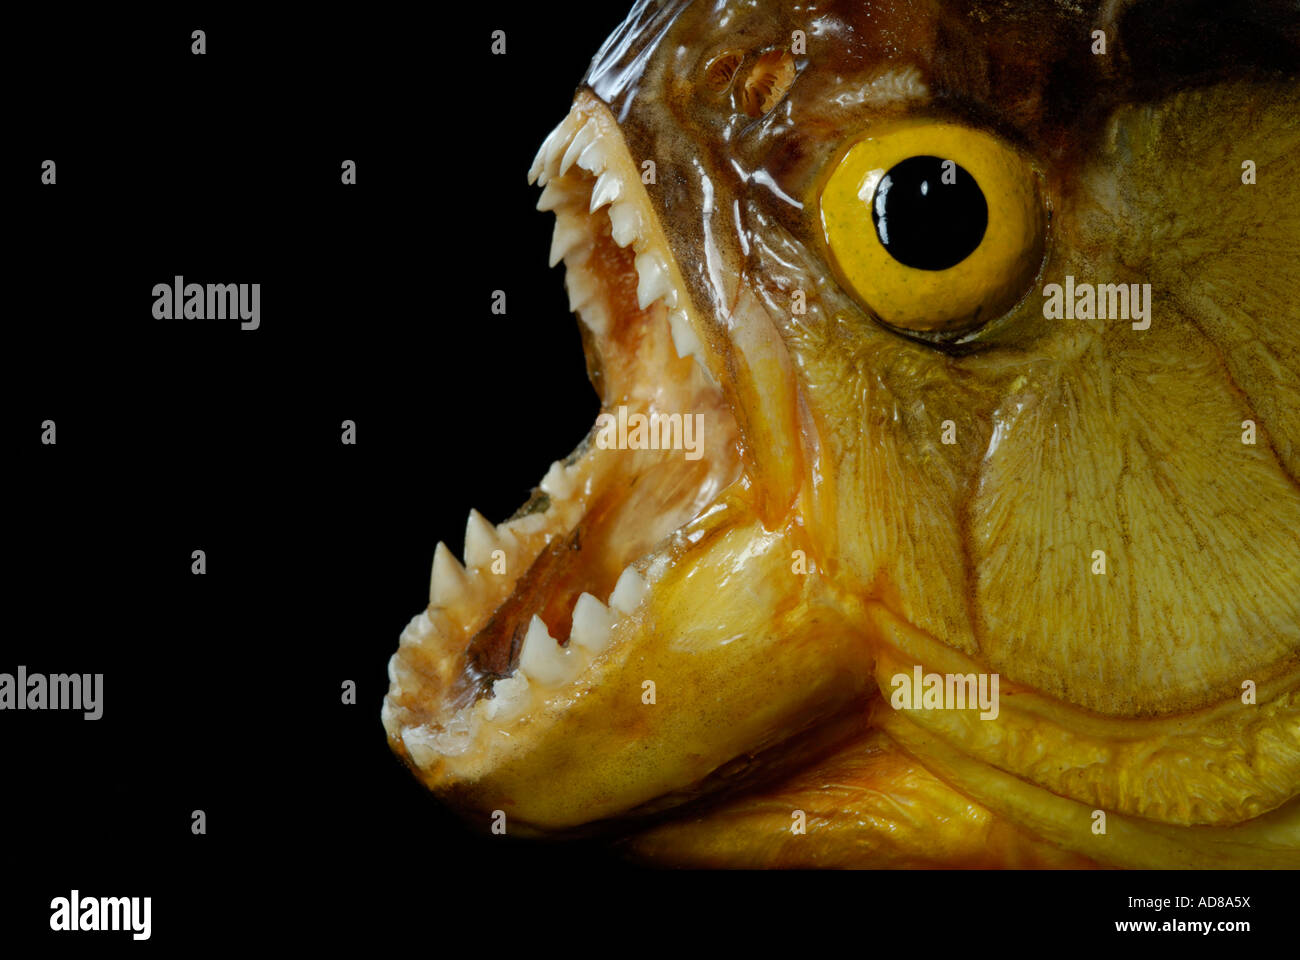 Piranha with mouth open showing teeth against black background Stock Photo